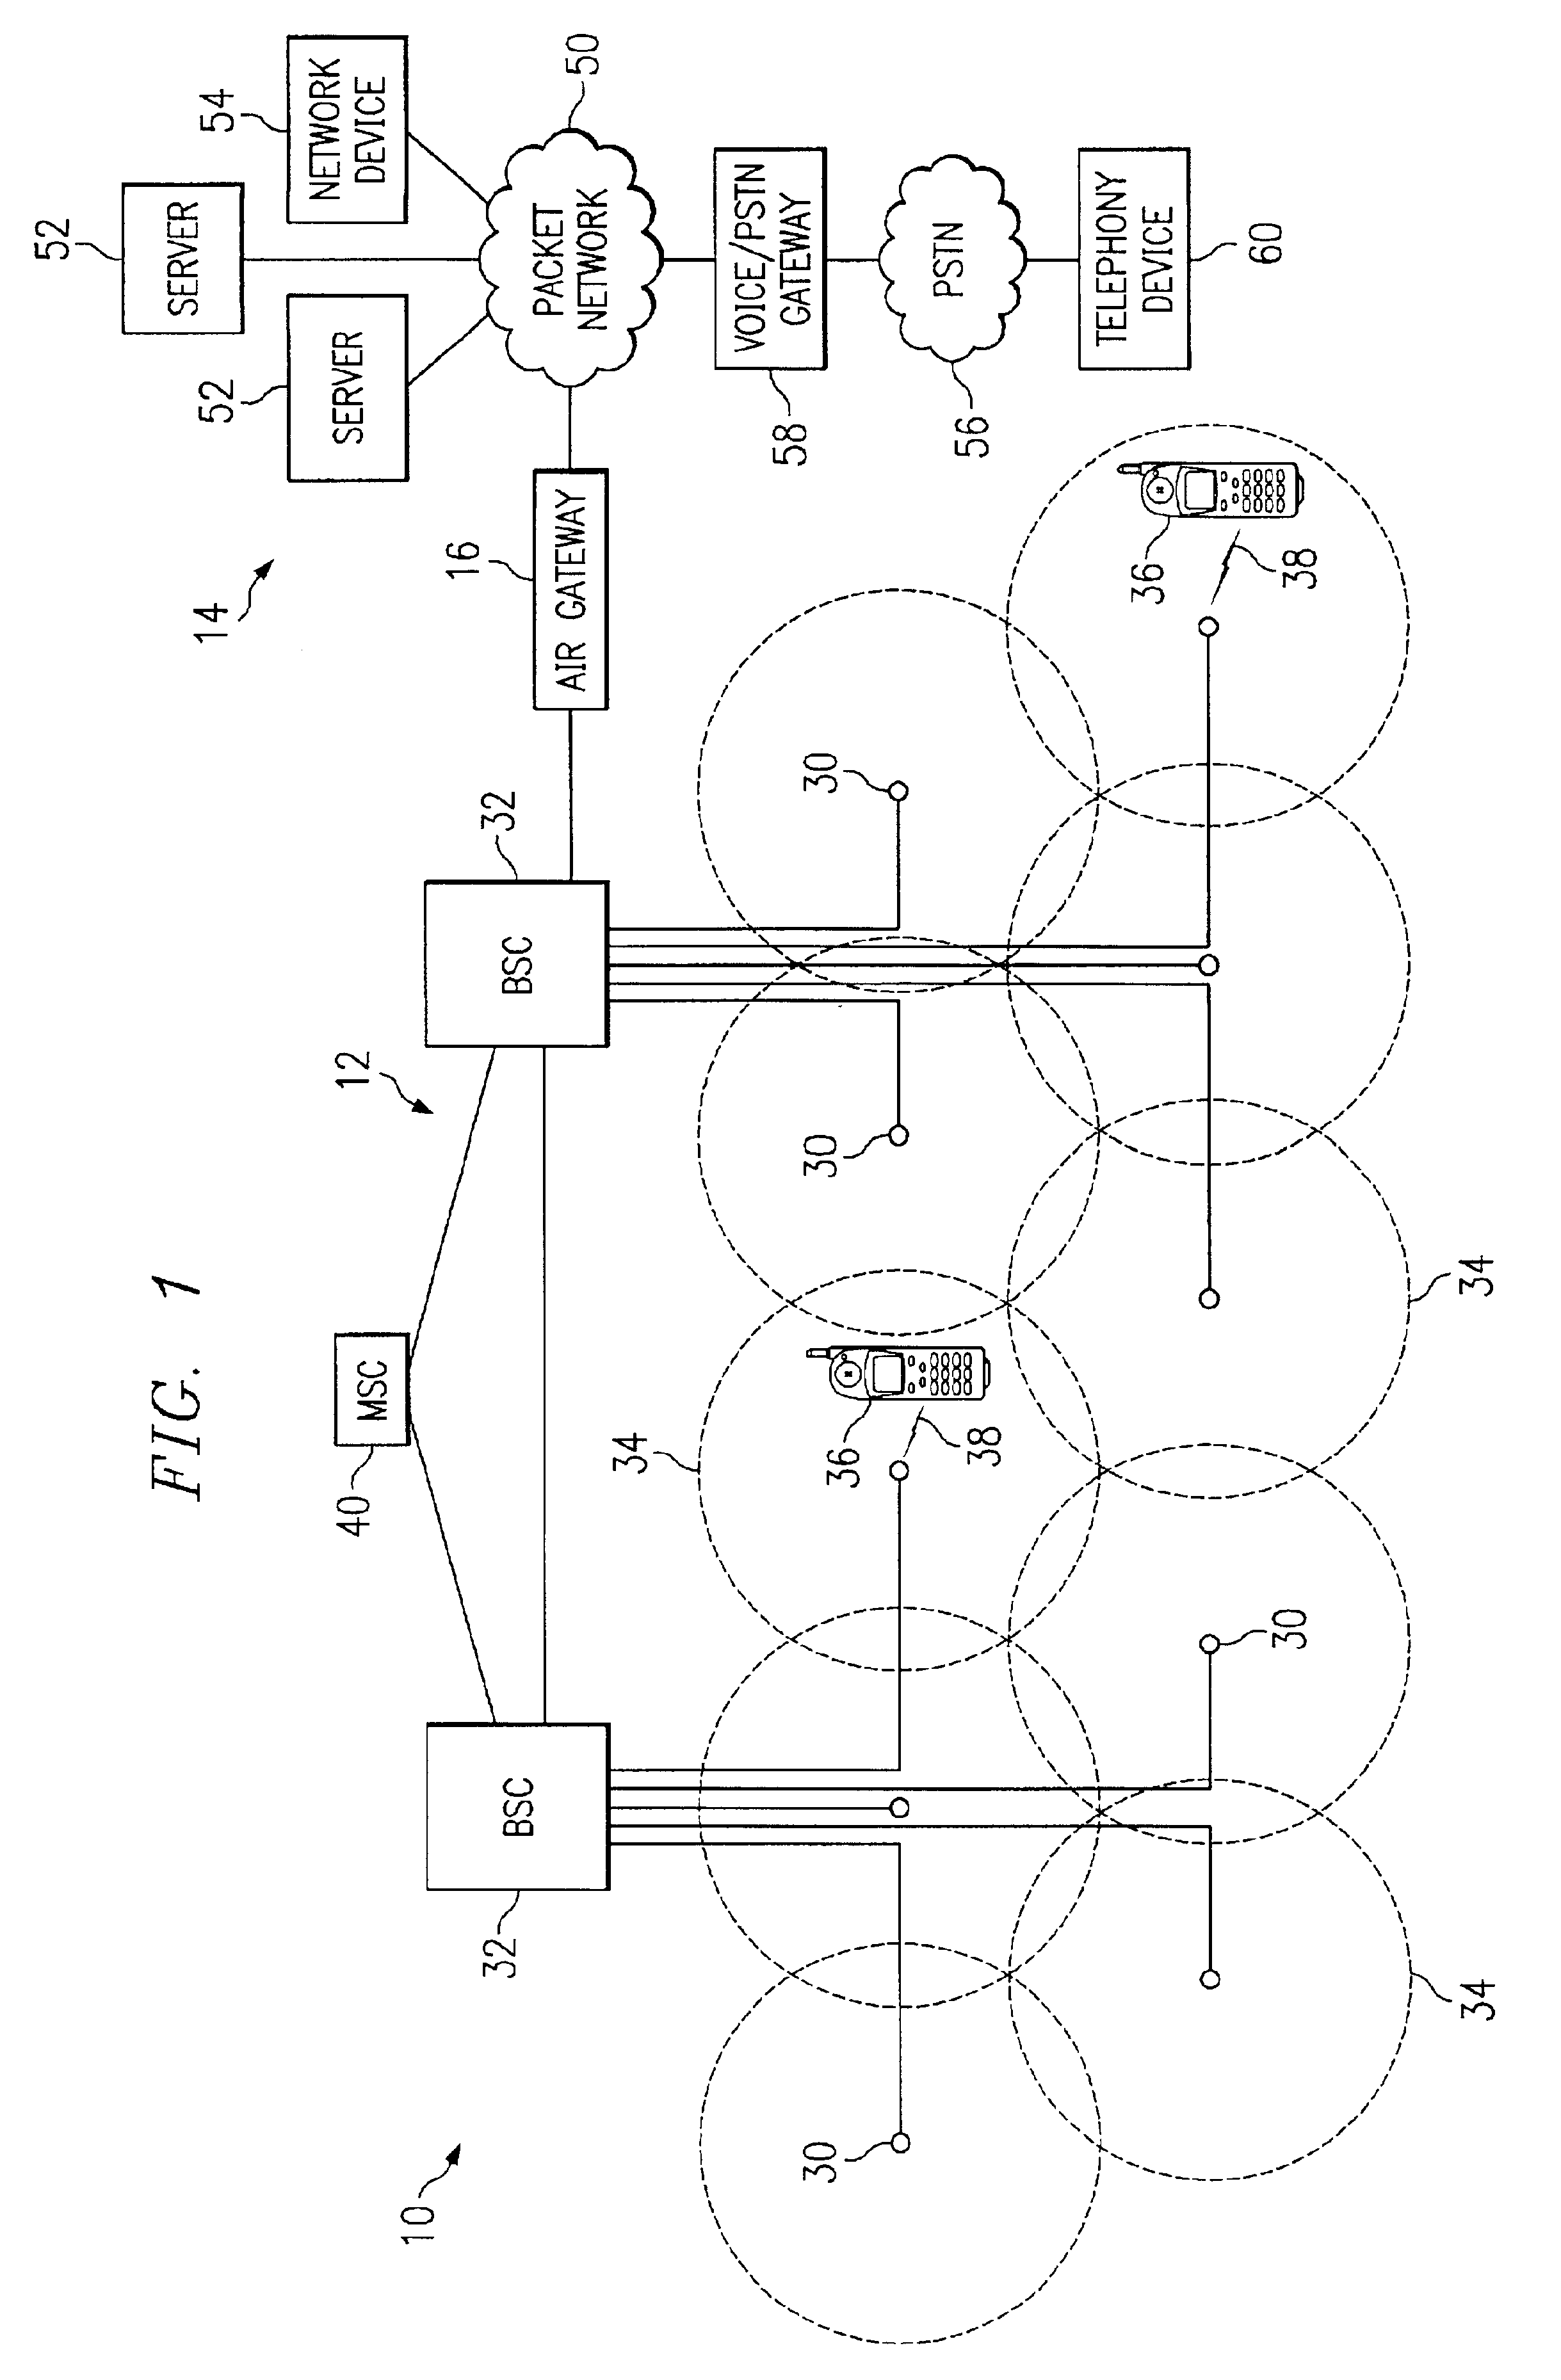 Method and system of integrated rate control for a traffic flow across wireline and wireless networks